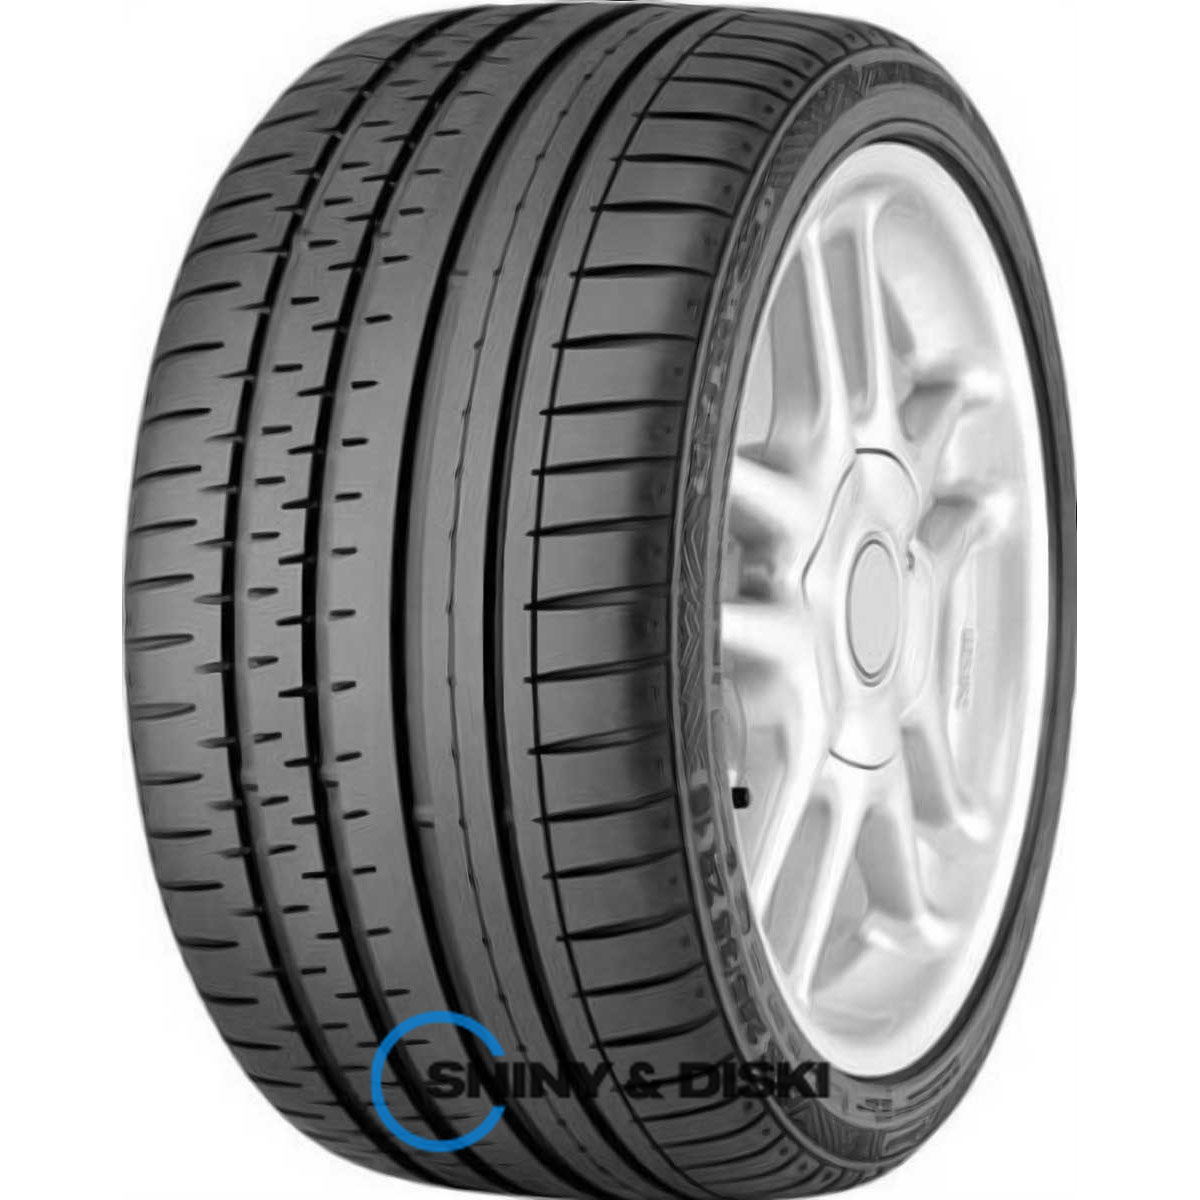 continental sportcontact 2 275/35 r18 99y